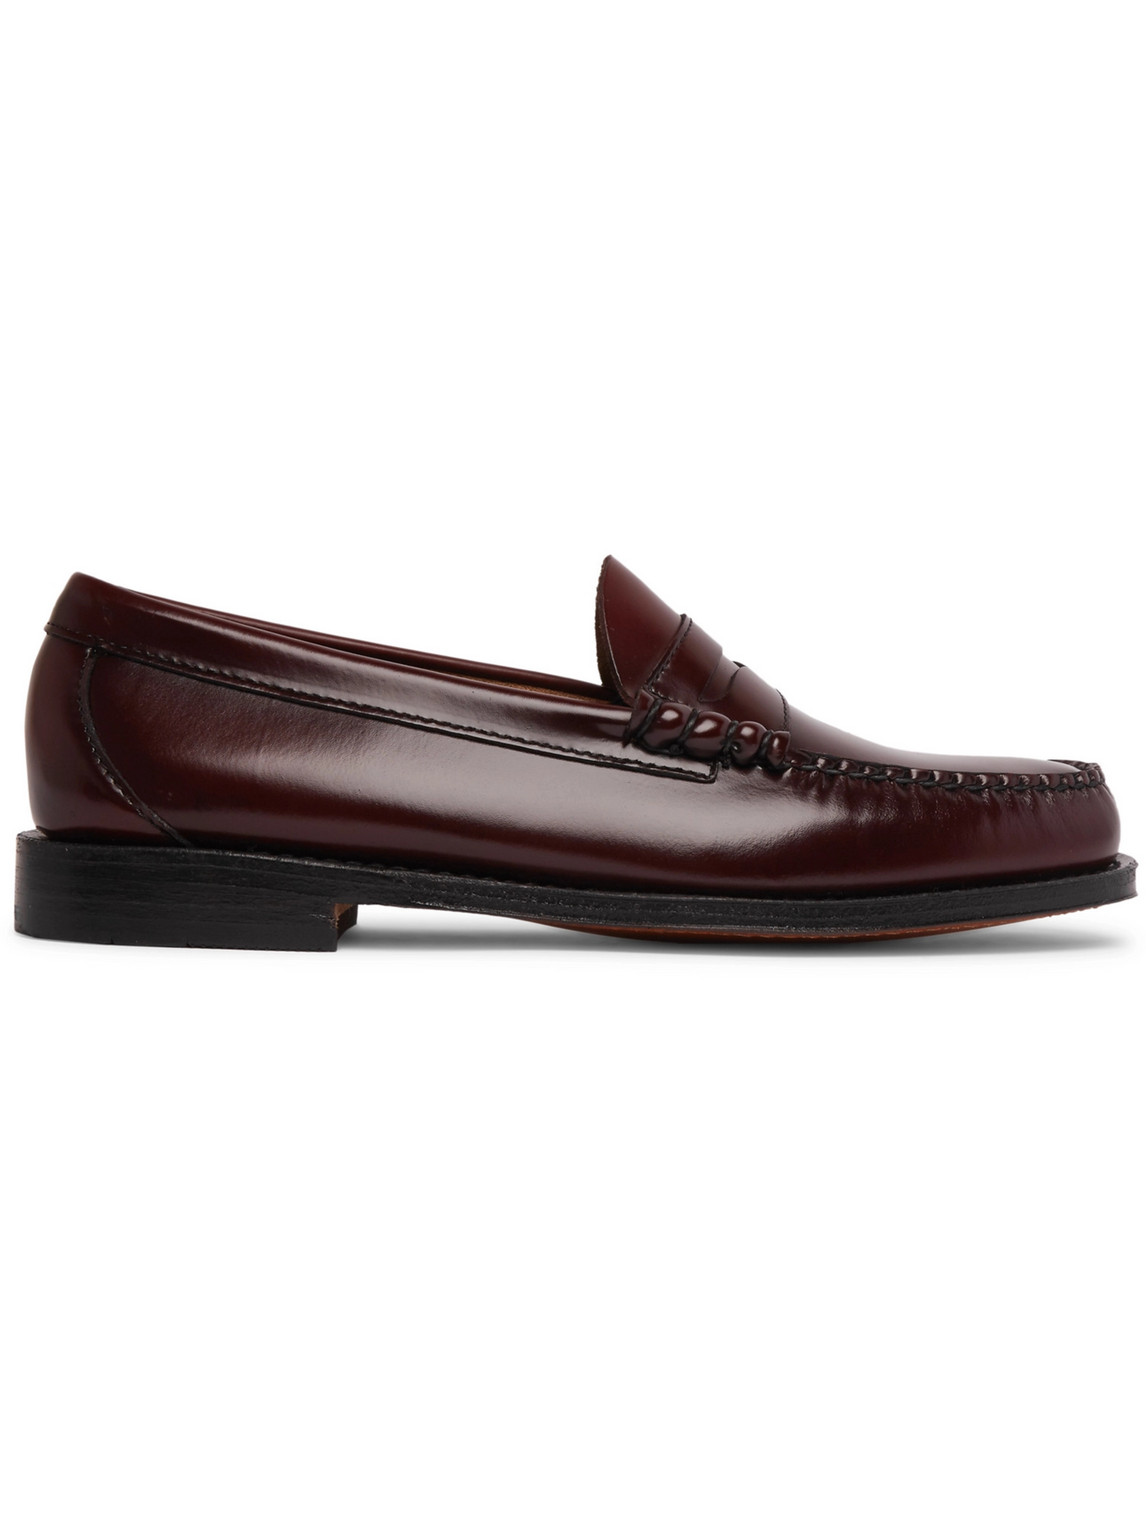 G.H. Bass & Co. - Weejuns Heritage Larson Leather Penny Loafers - Men - Burgundy - UK 5 von G.H. Bass & Co.